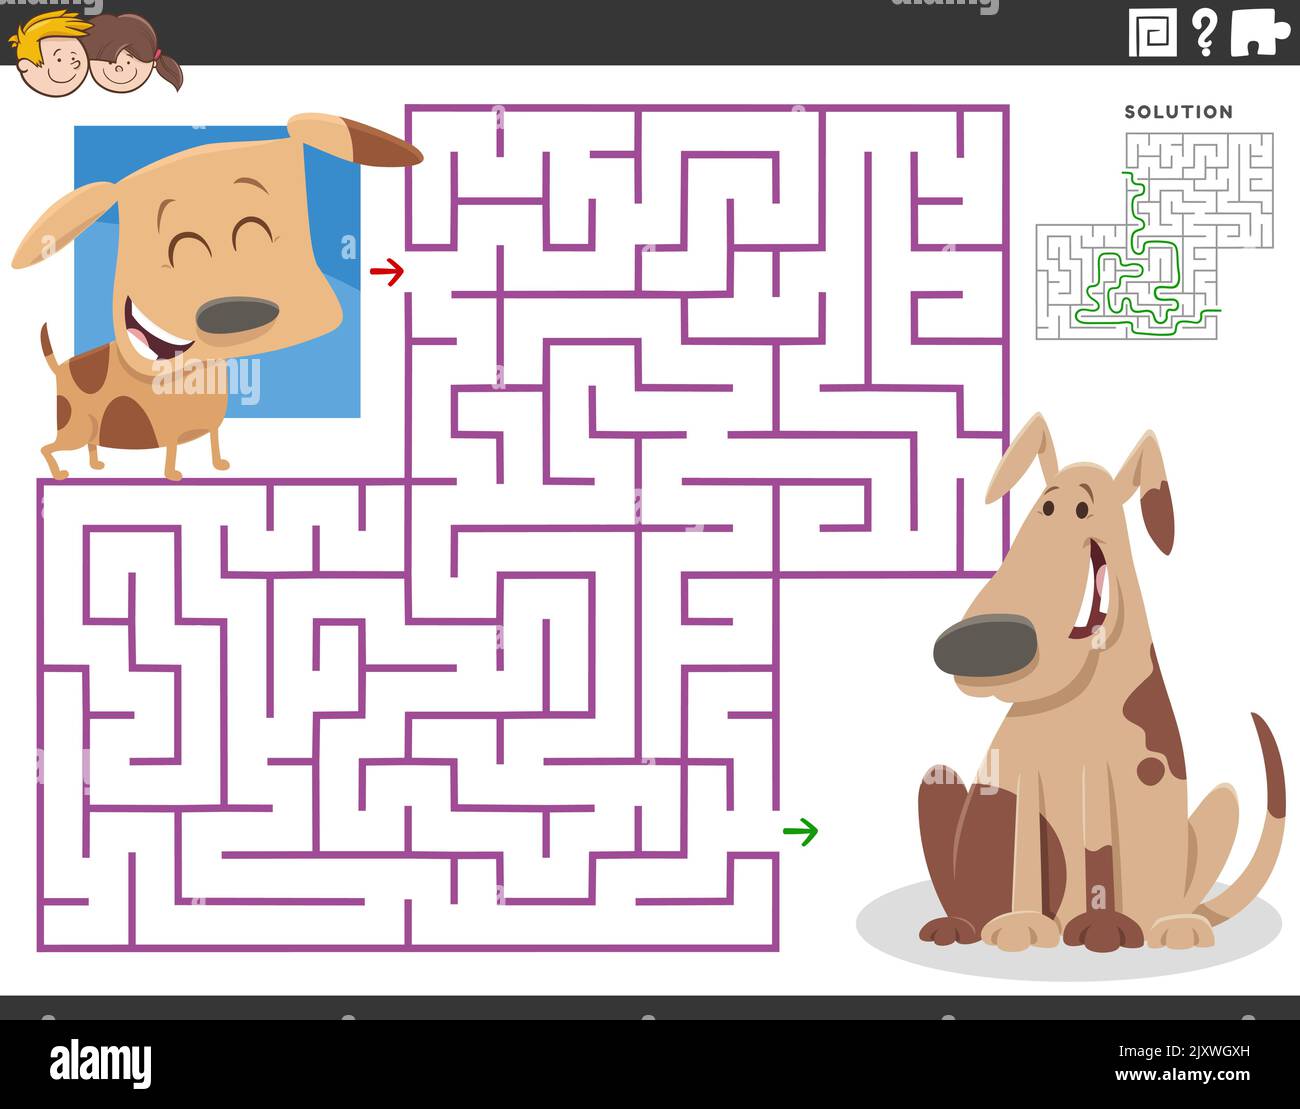 https://c8.alamy.com/comp/2JXWGXH/cartoon-illustration-of-educational-maze-puzzle-for-children-with-adult-dog-and-little-puppy-2JXWGXH.jpg